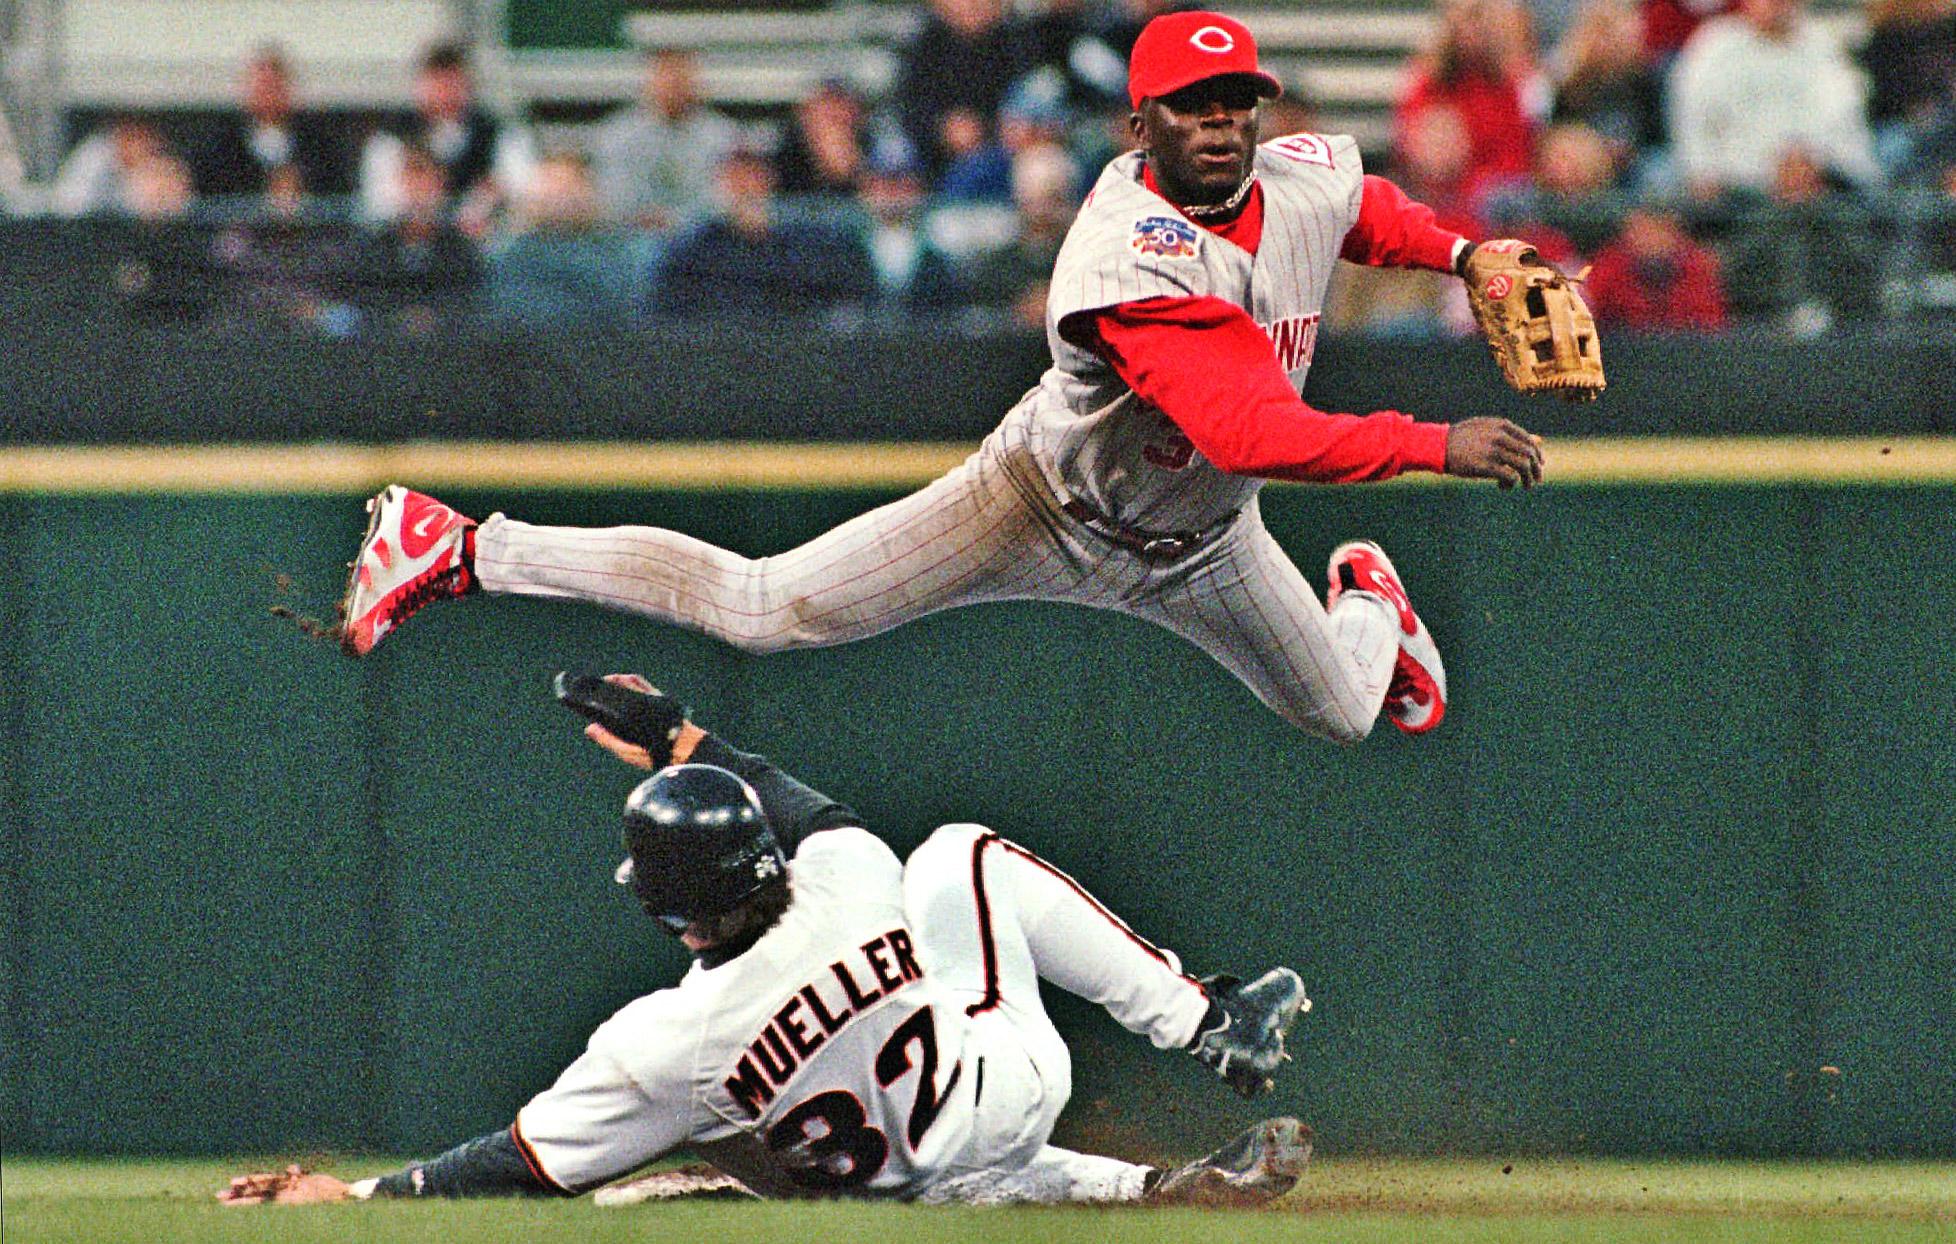 Join us in wishing a very happy birthday to former Reds infielder Pokey Reese! 